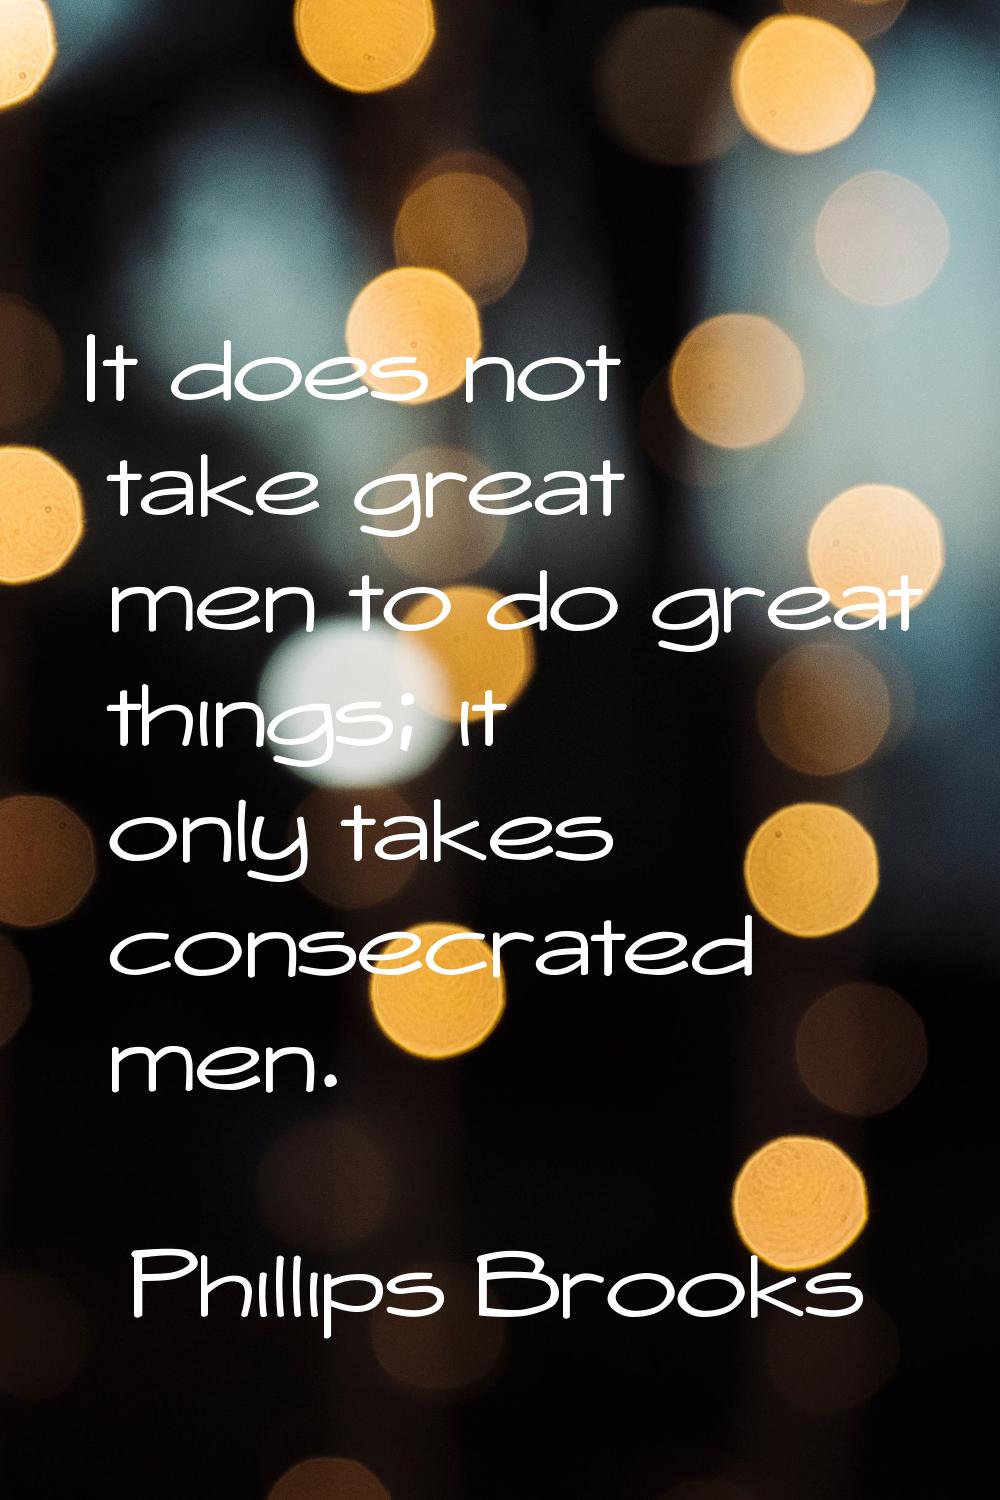 It does not take great men to do great things; it only takes consecrated men.